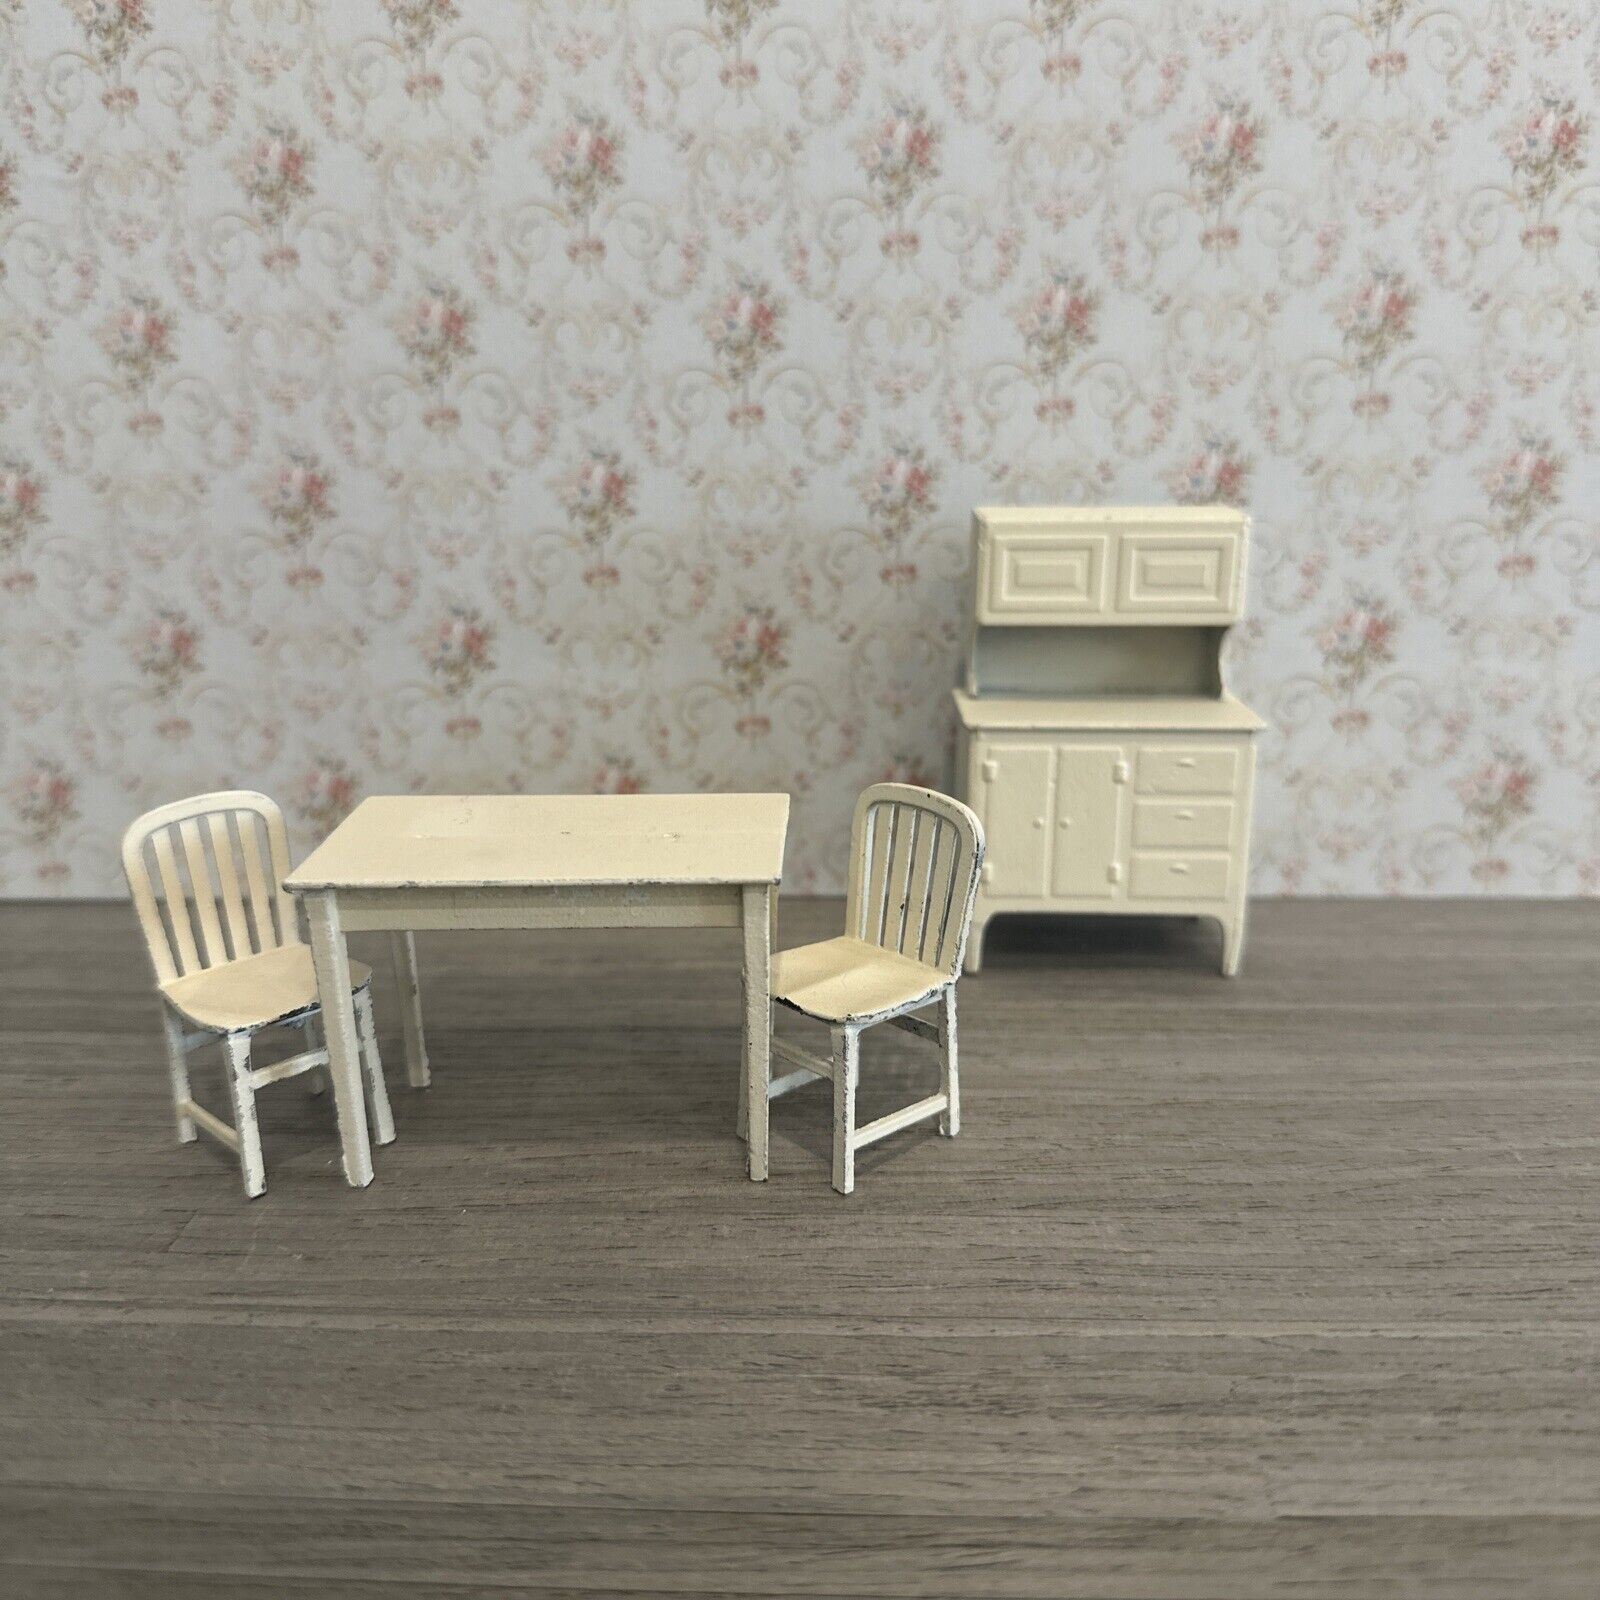 Antique 1930s Tootsie Toy Dollhouse Miniature Kitchen Table, Two Chairs & Hutch